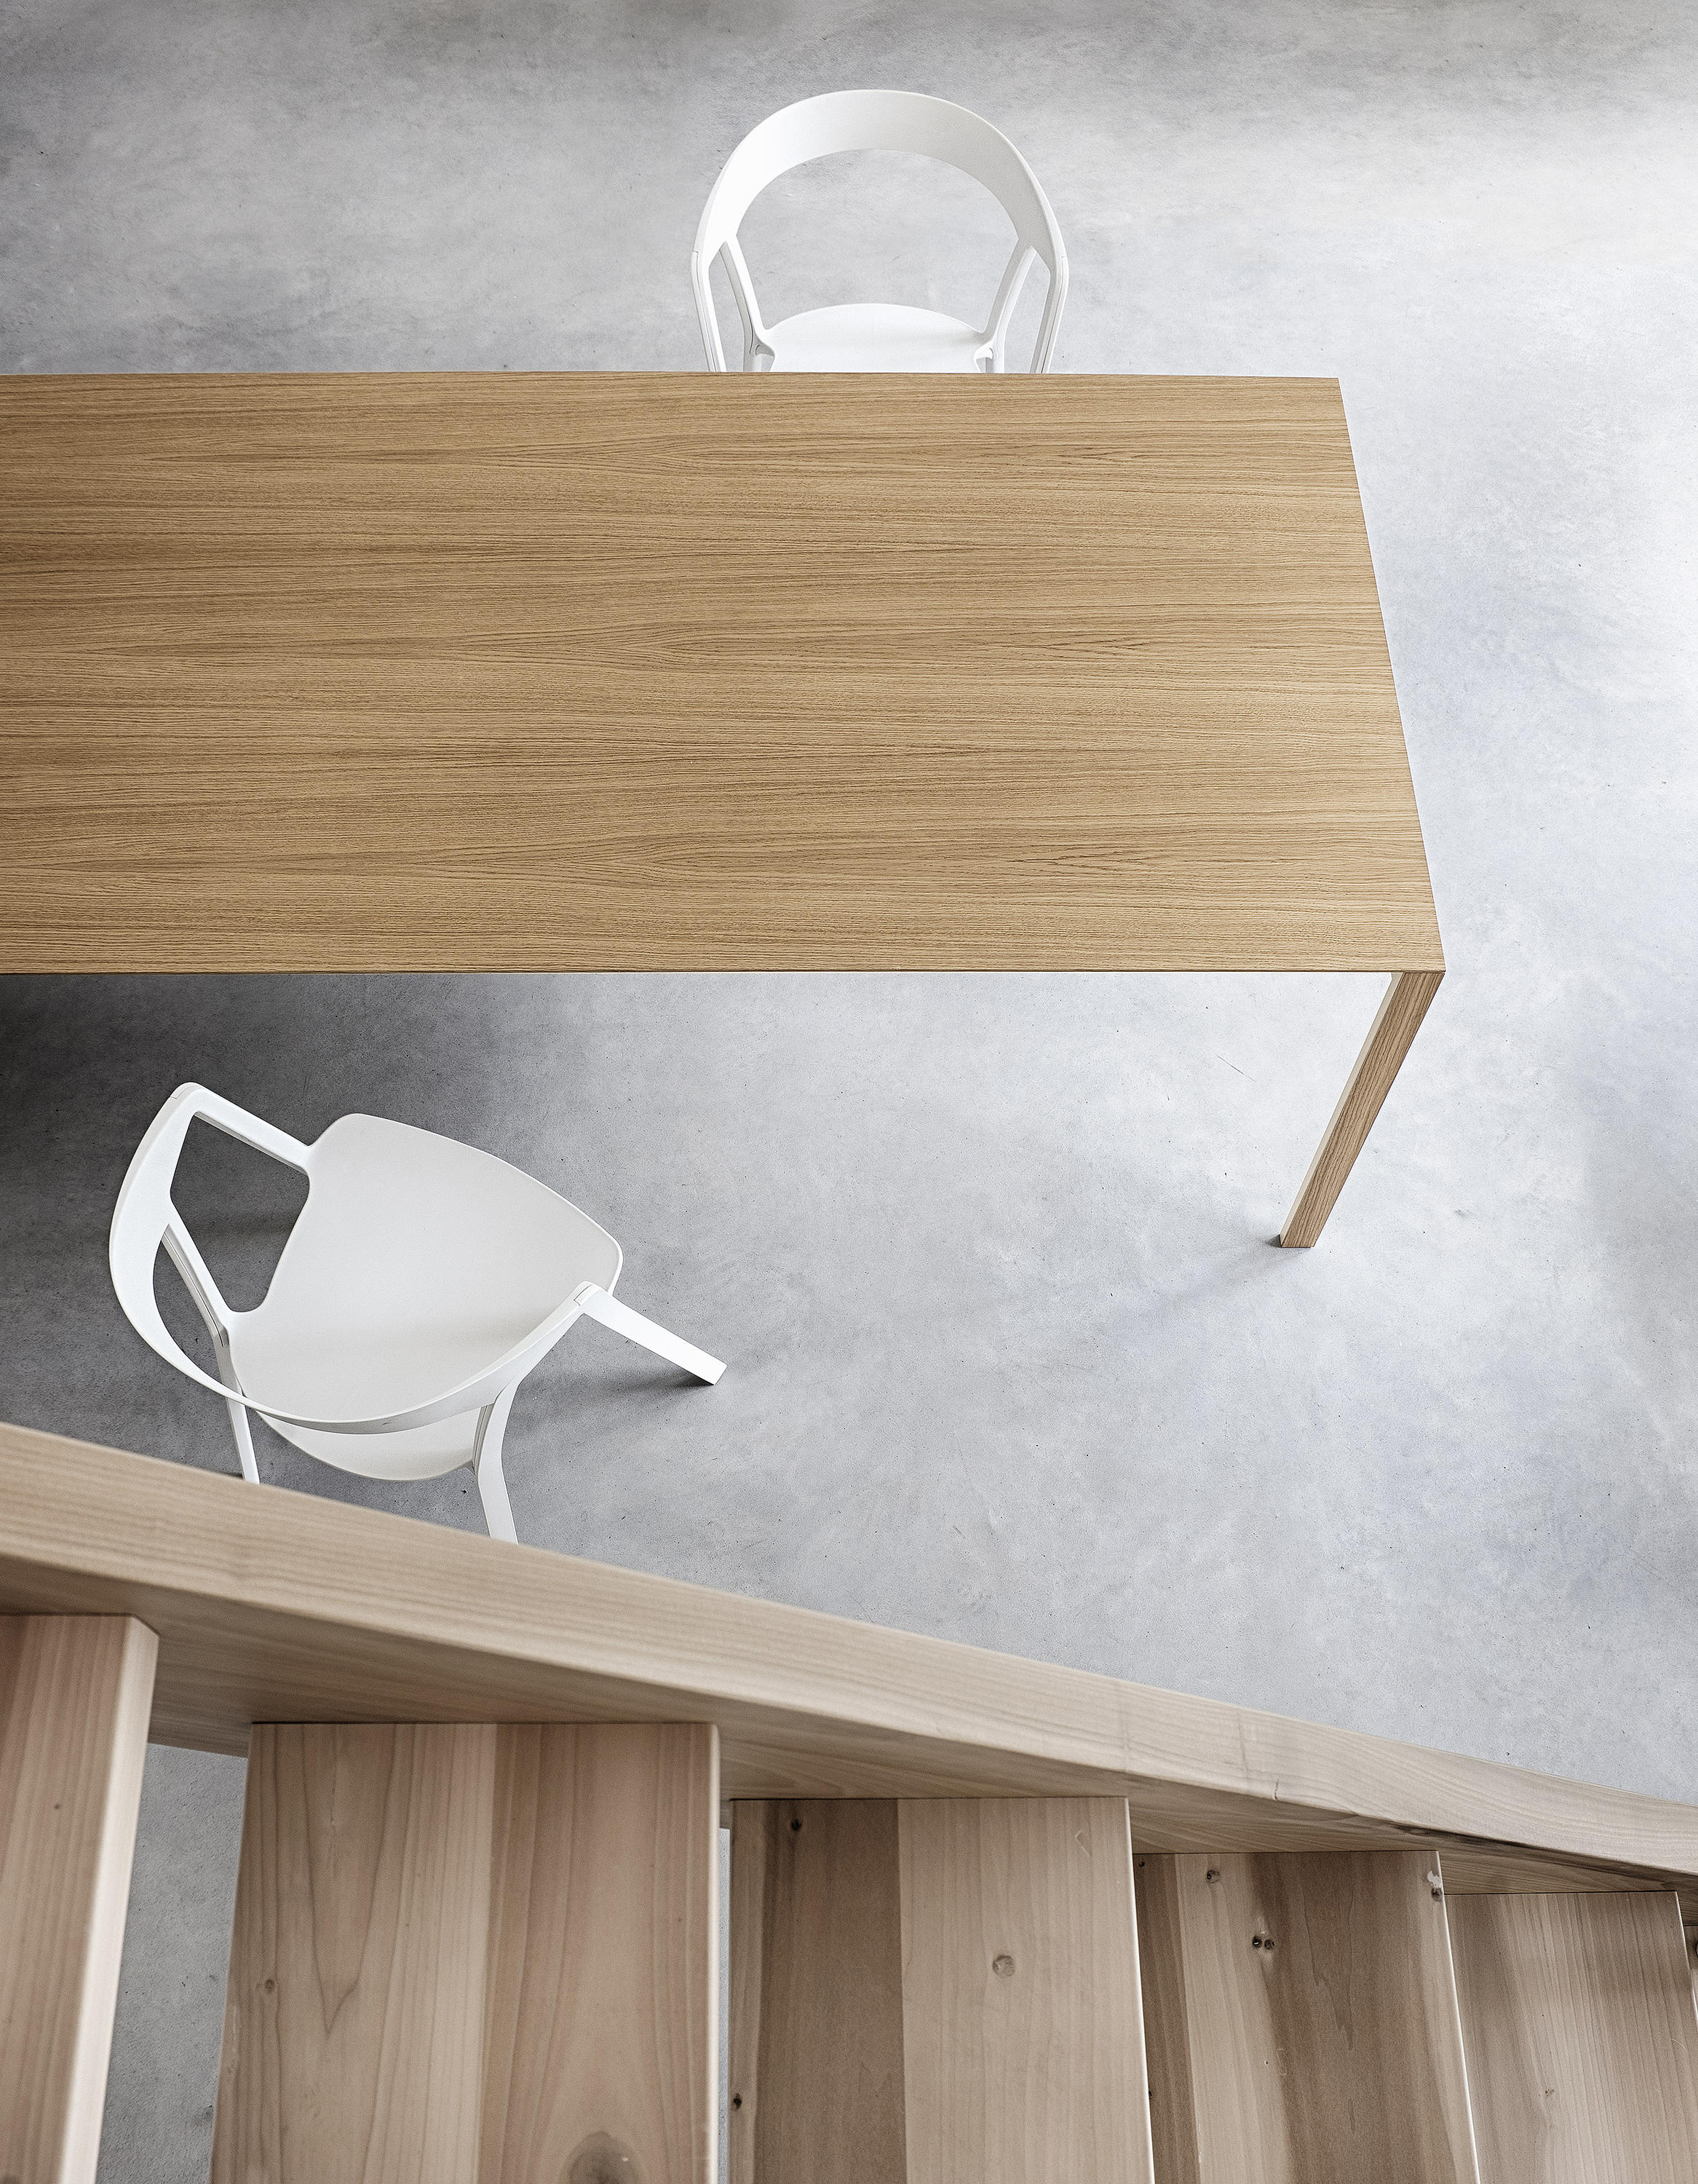 THIN-K Extending table By Kristalia